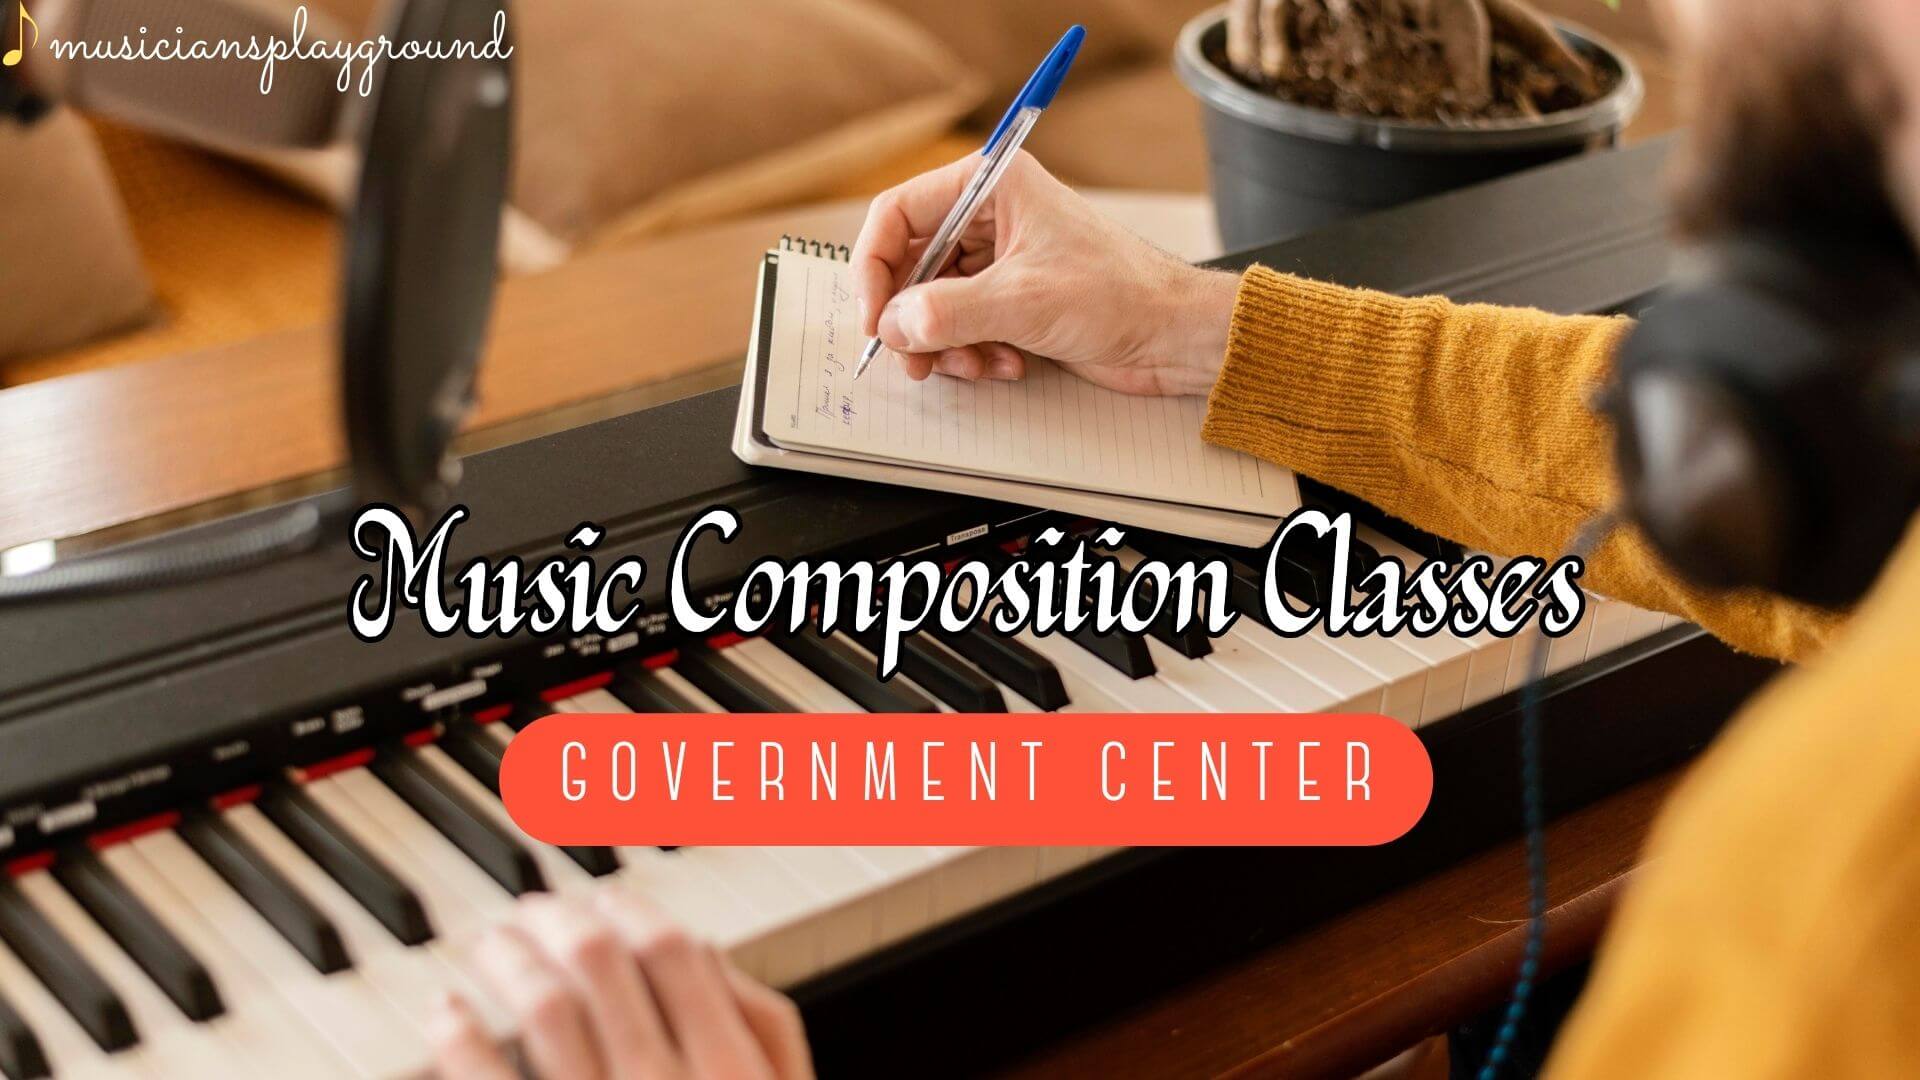 Music Composition Classes in Government Center, Massachusetts: Unlock Your Musical Potential at Musicians Playground